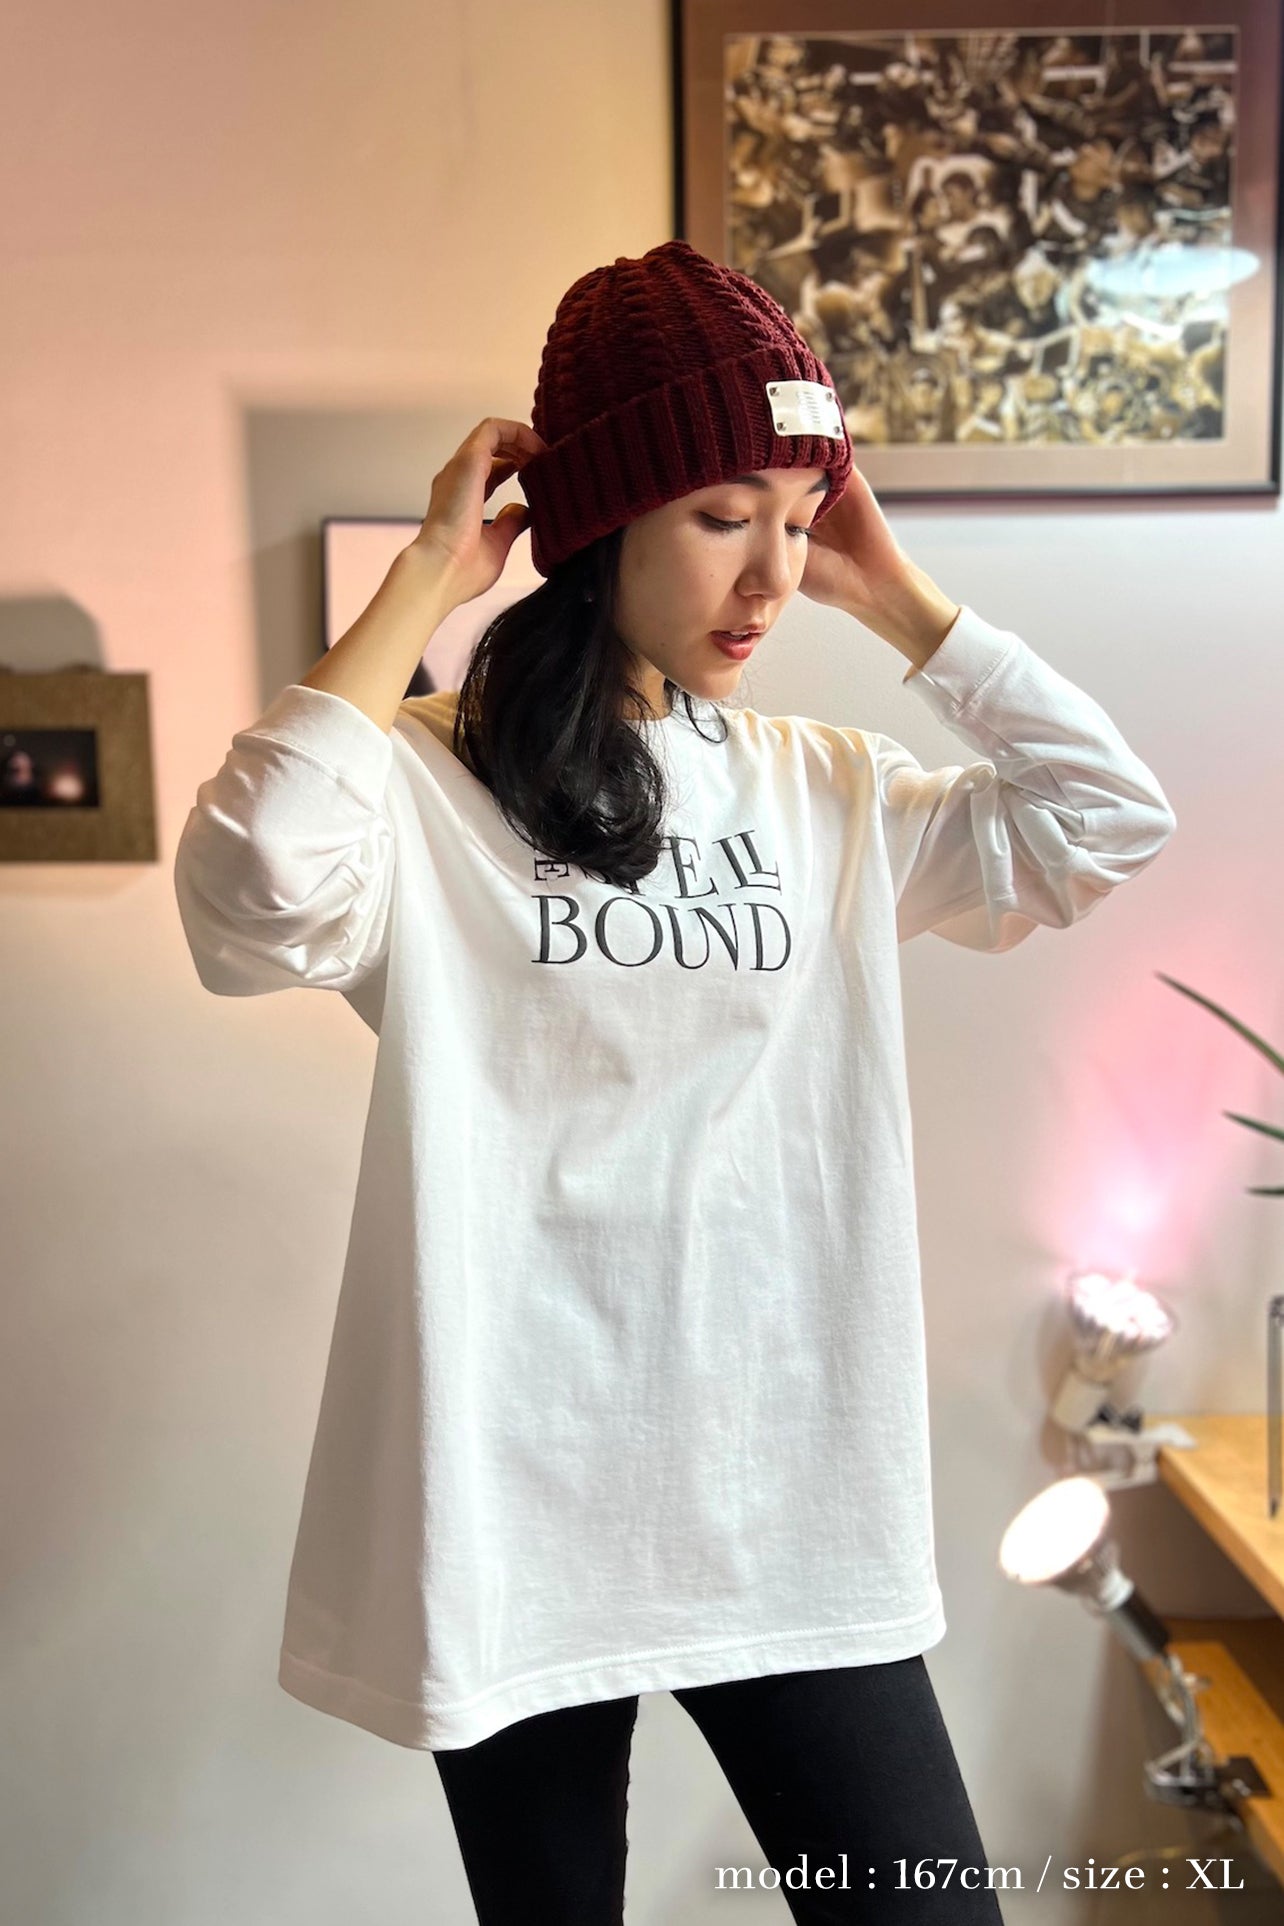 THE SPELLBOUND Long Sleeve T-shirts